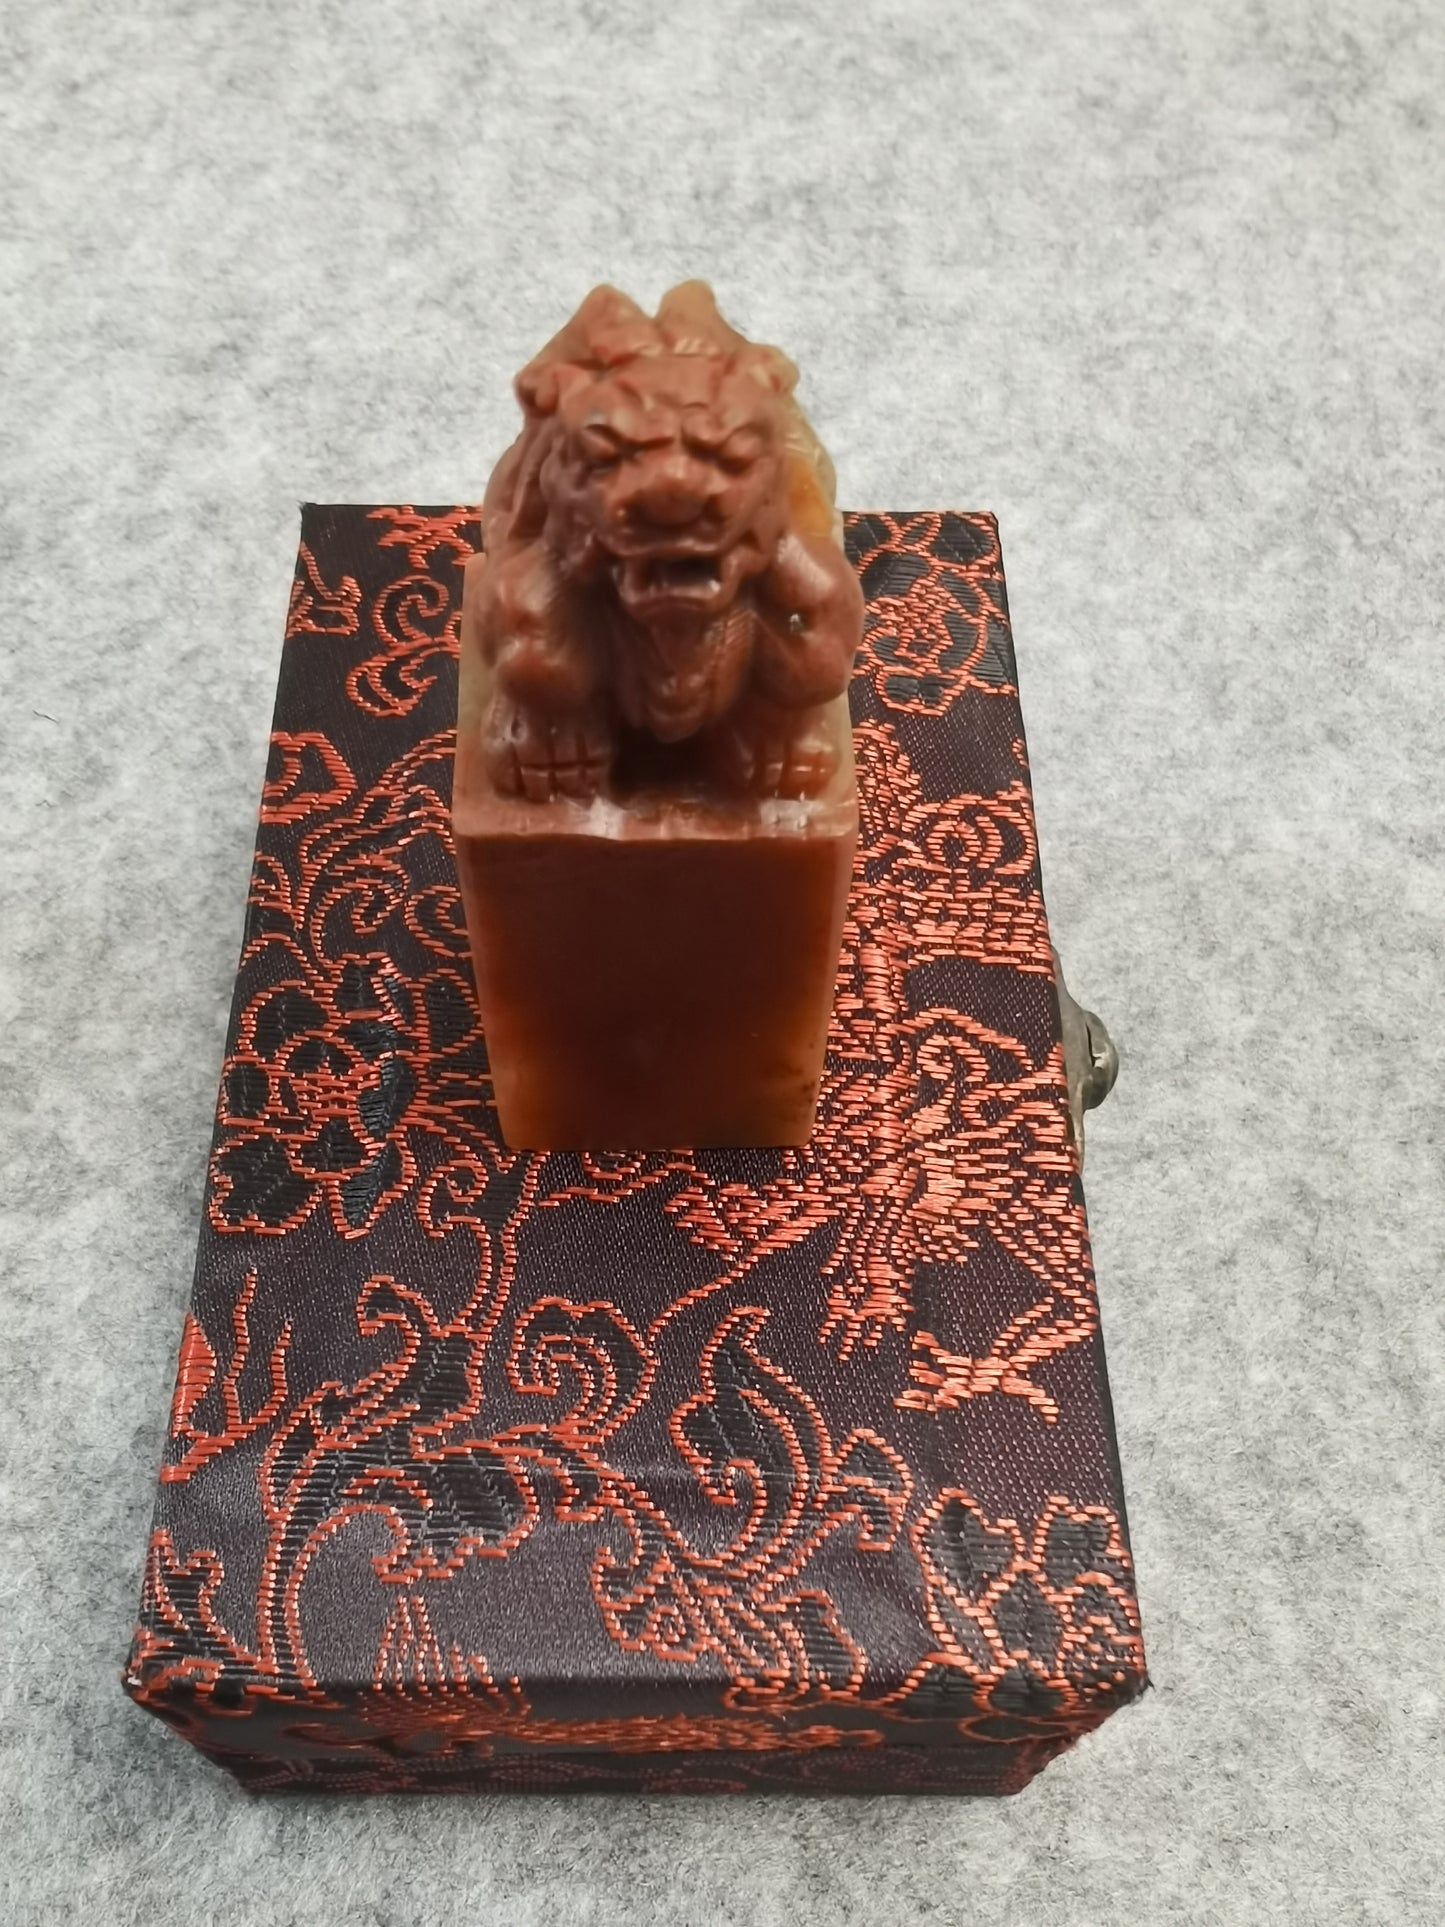 Stamp-Chinese stamp with lions on the top. Customize gift for friends and family